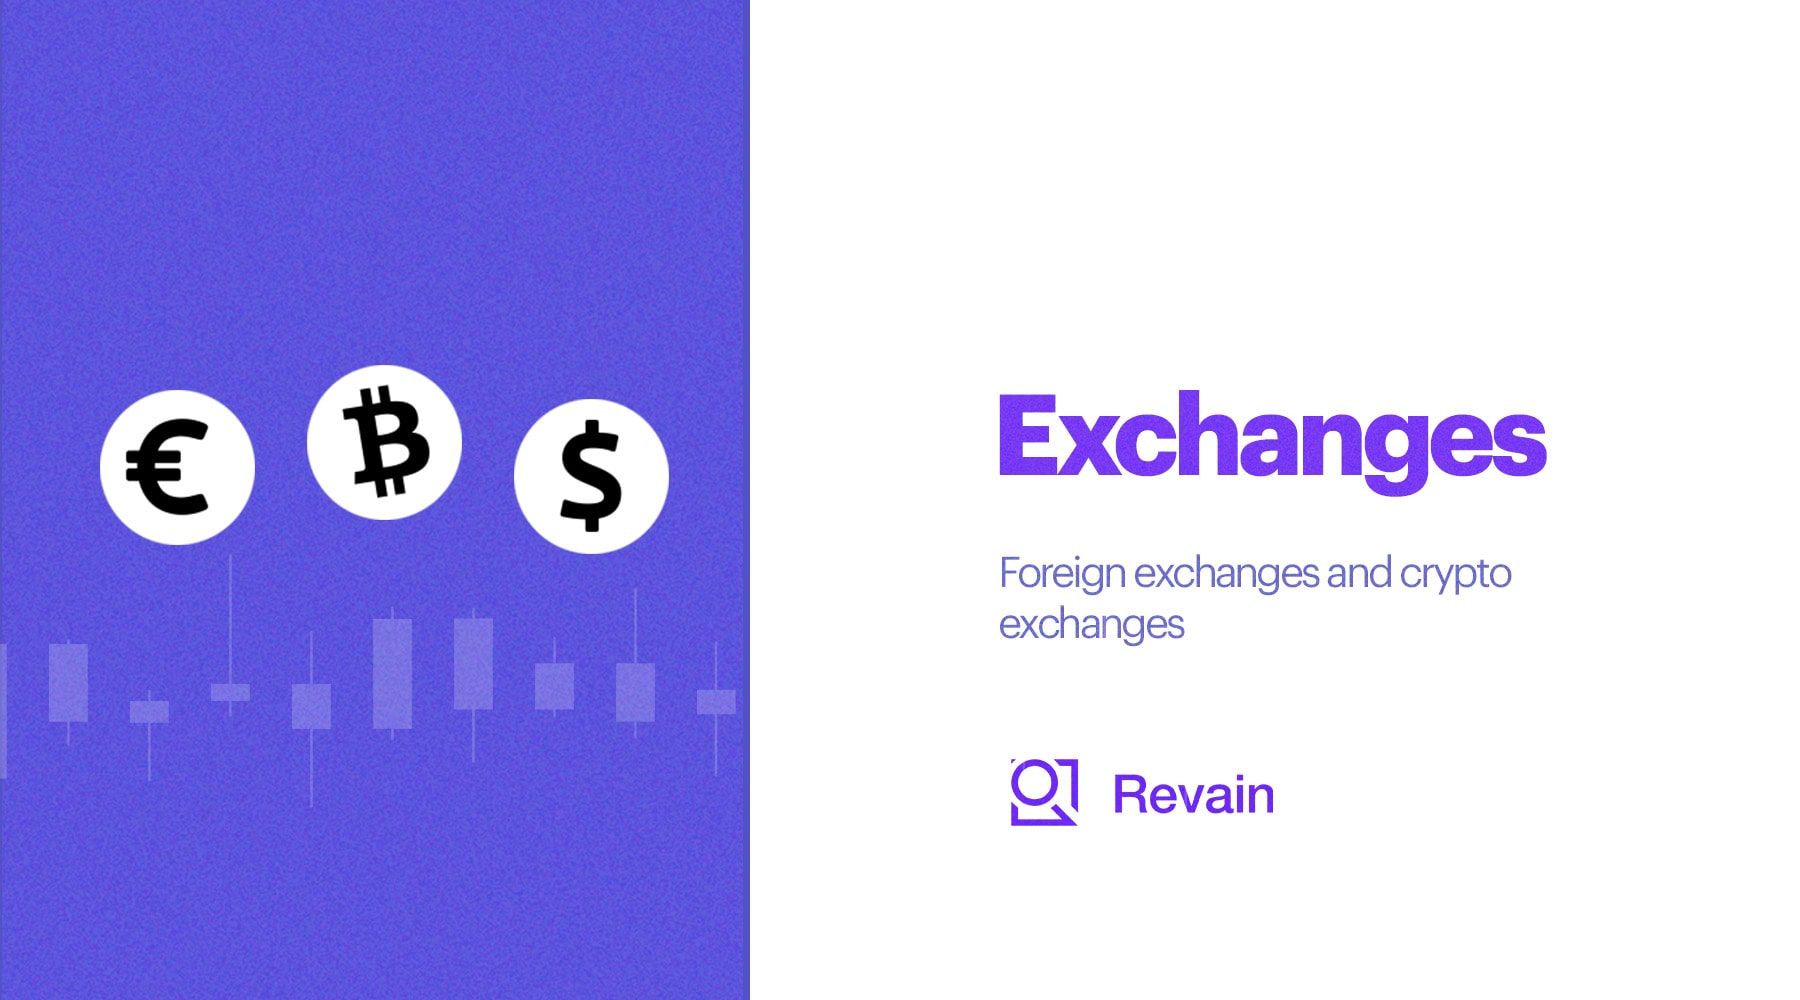 Article Forex vs Crypto Exchanges: what is the difference?